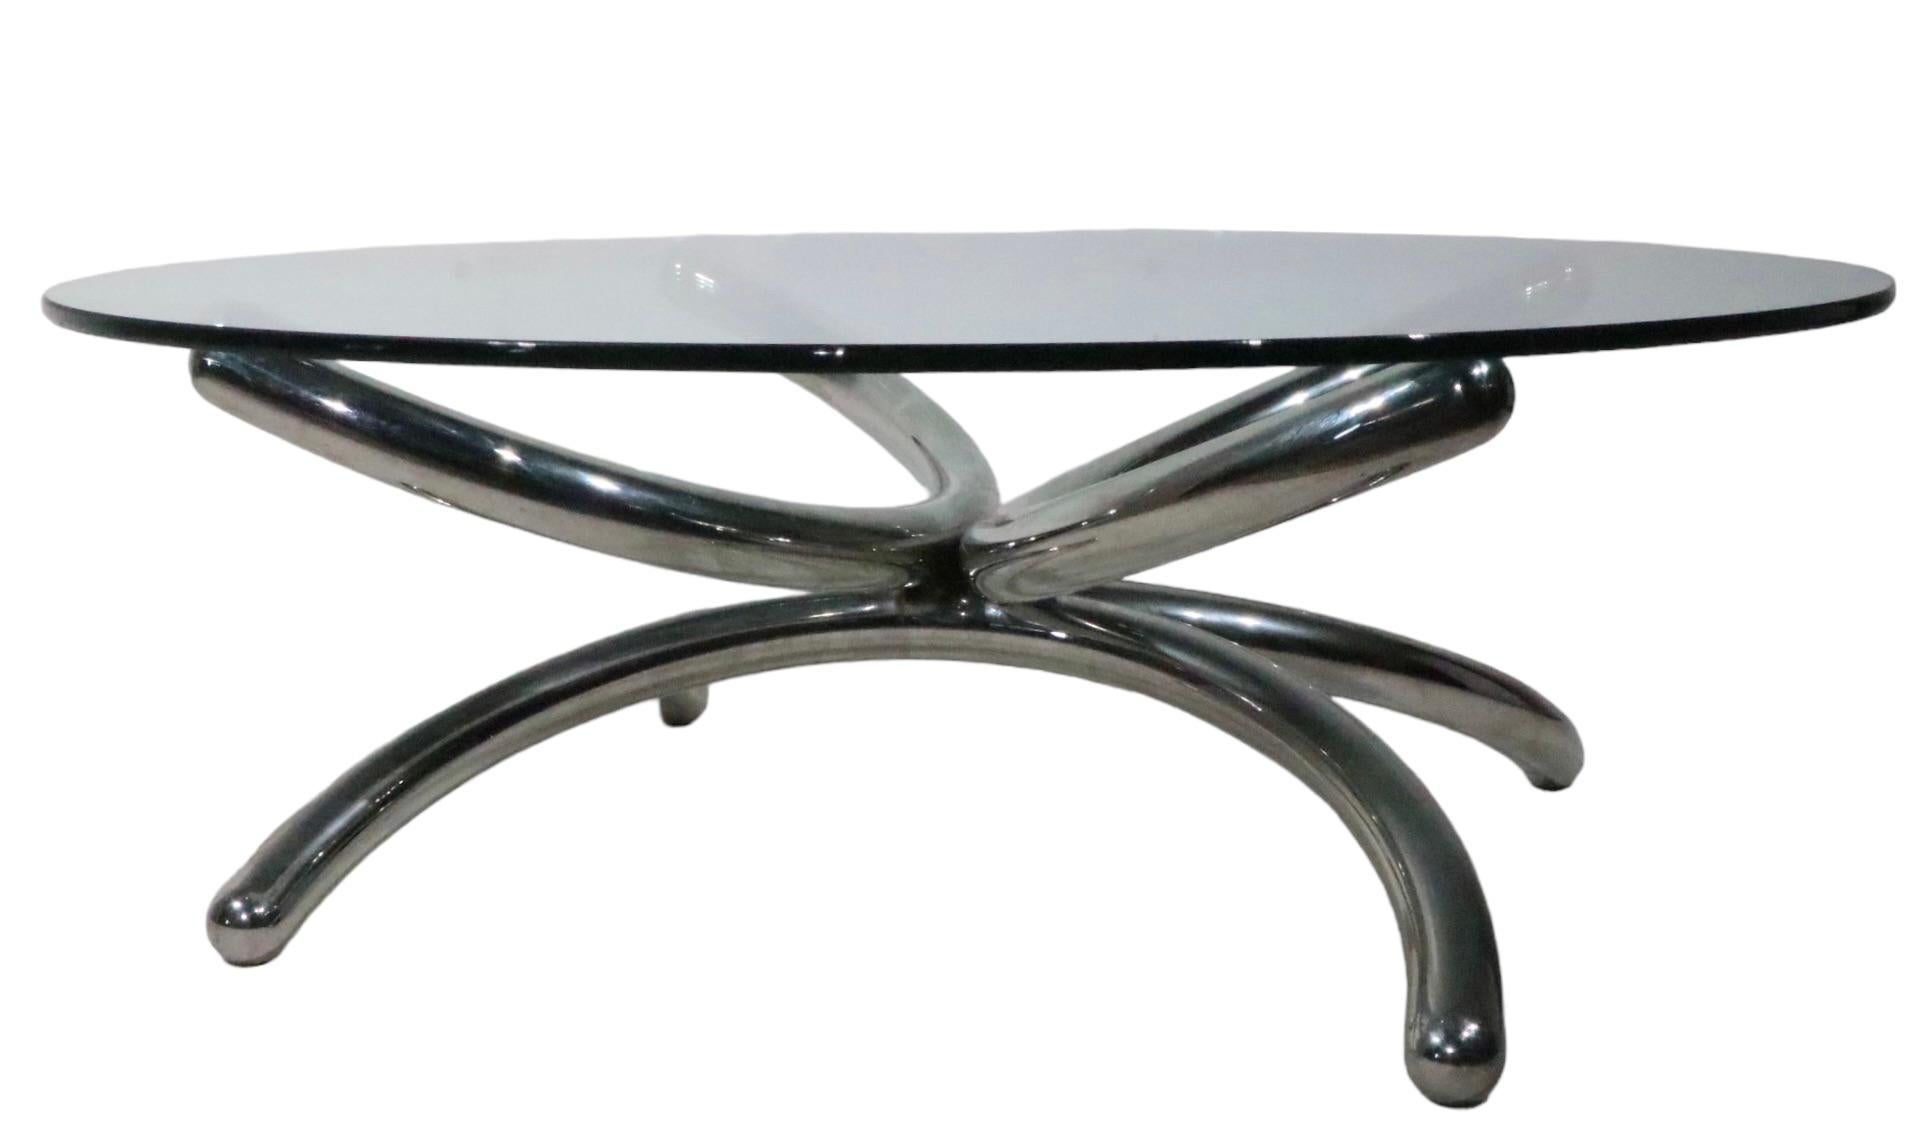  Round Chrome and Glass Coffee Cocktail Table c 1960/70s possibly Paul Tuttle  For Sale 11